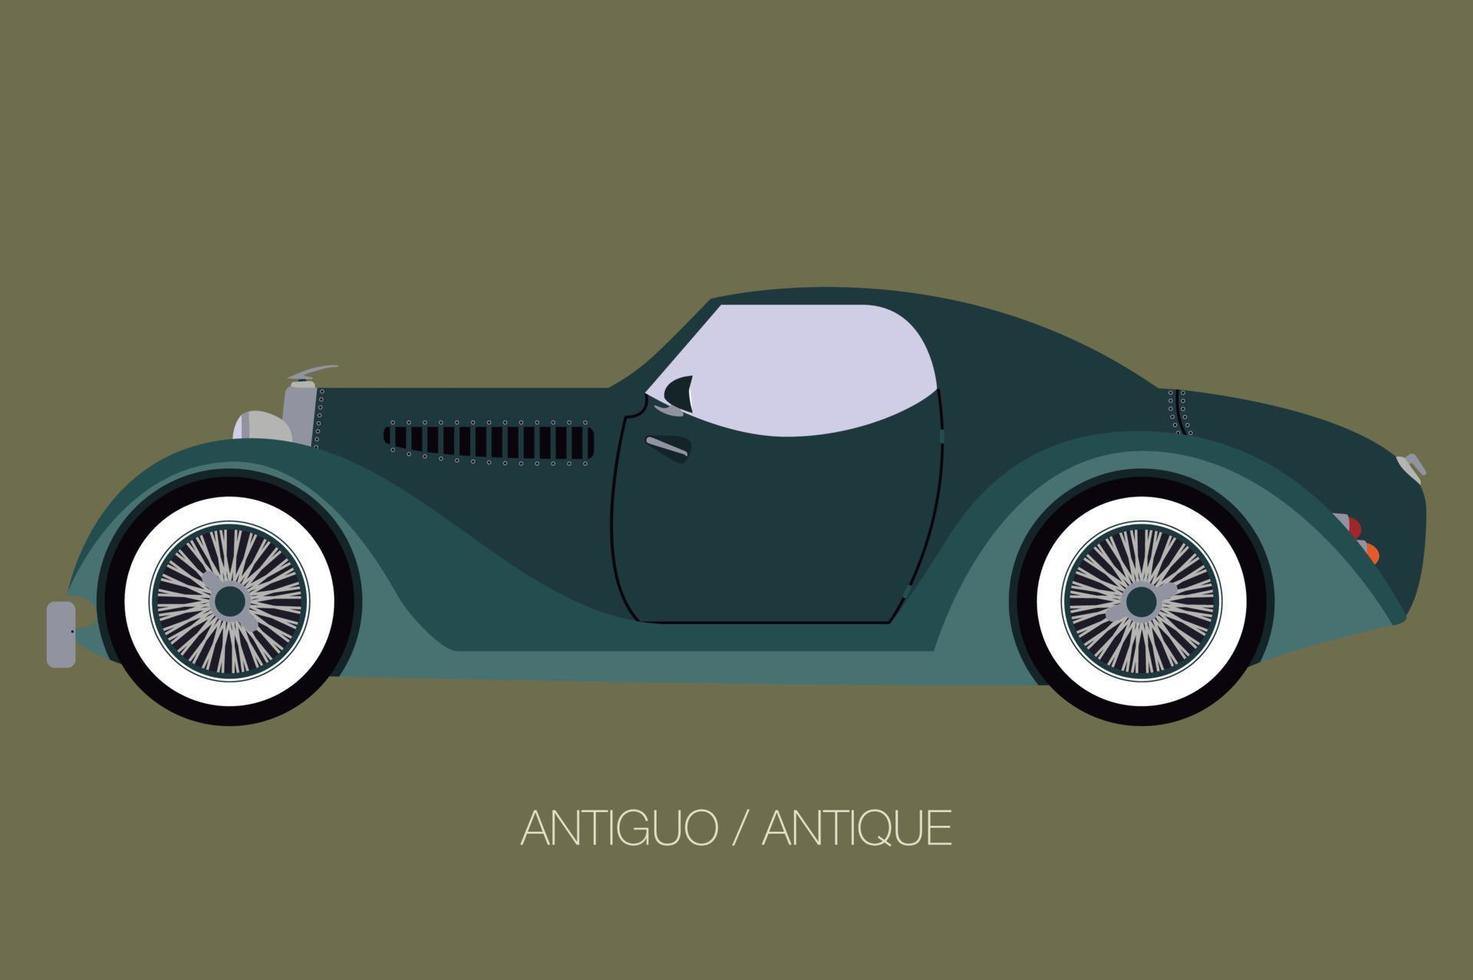 antique car, vector car icon, side view of car